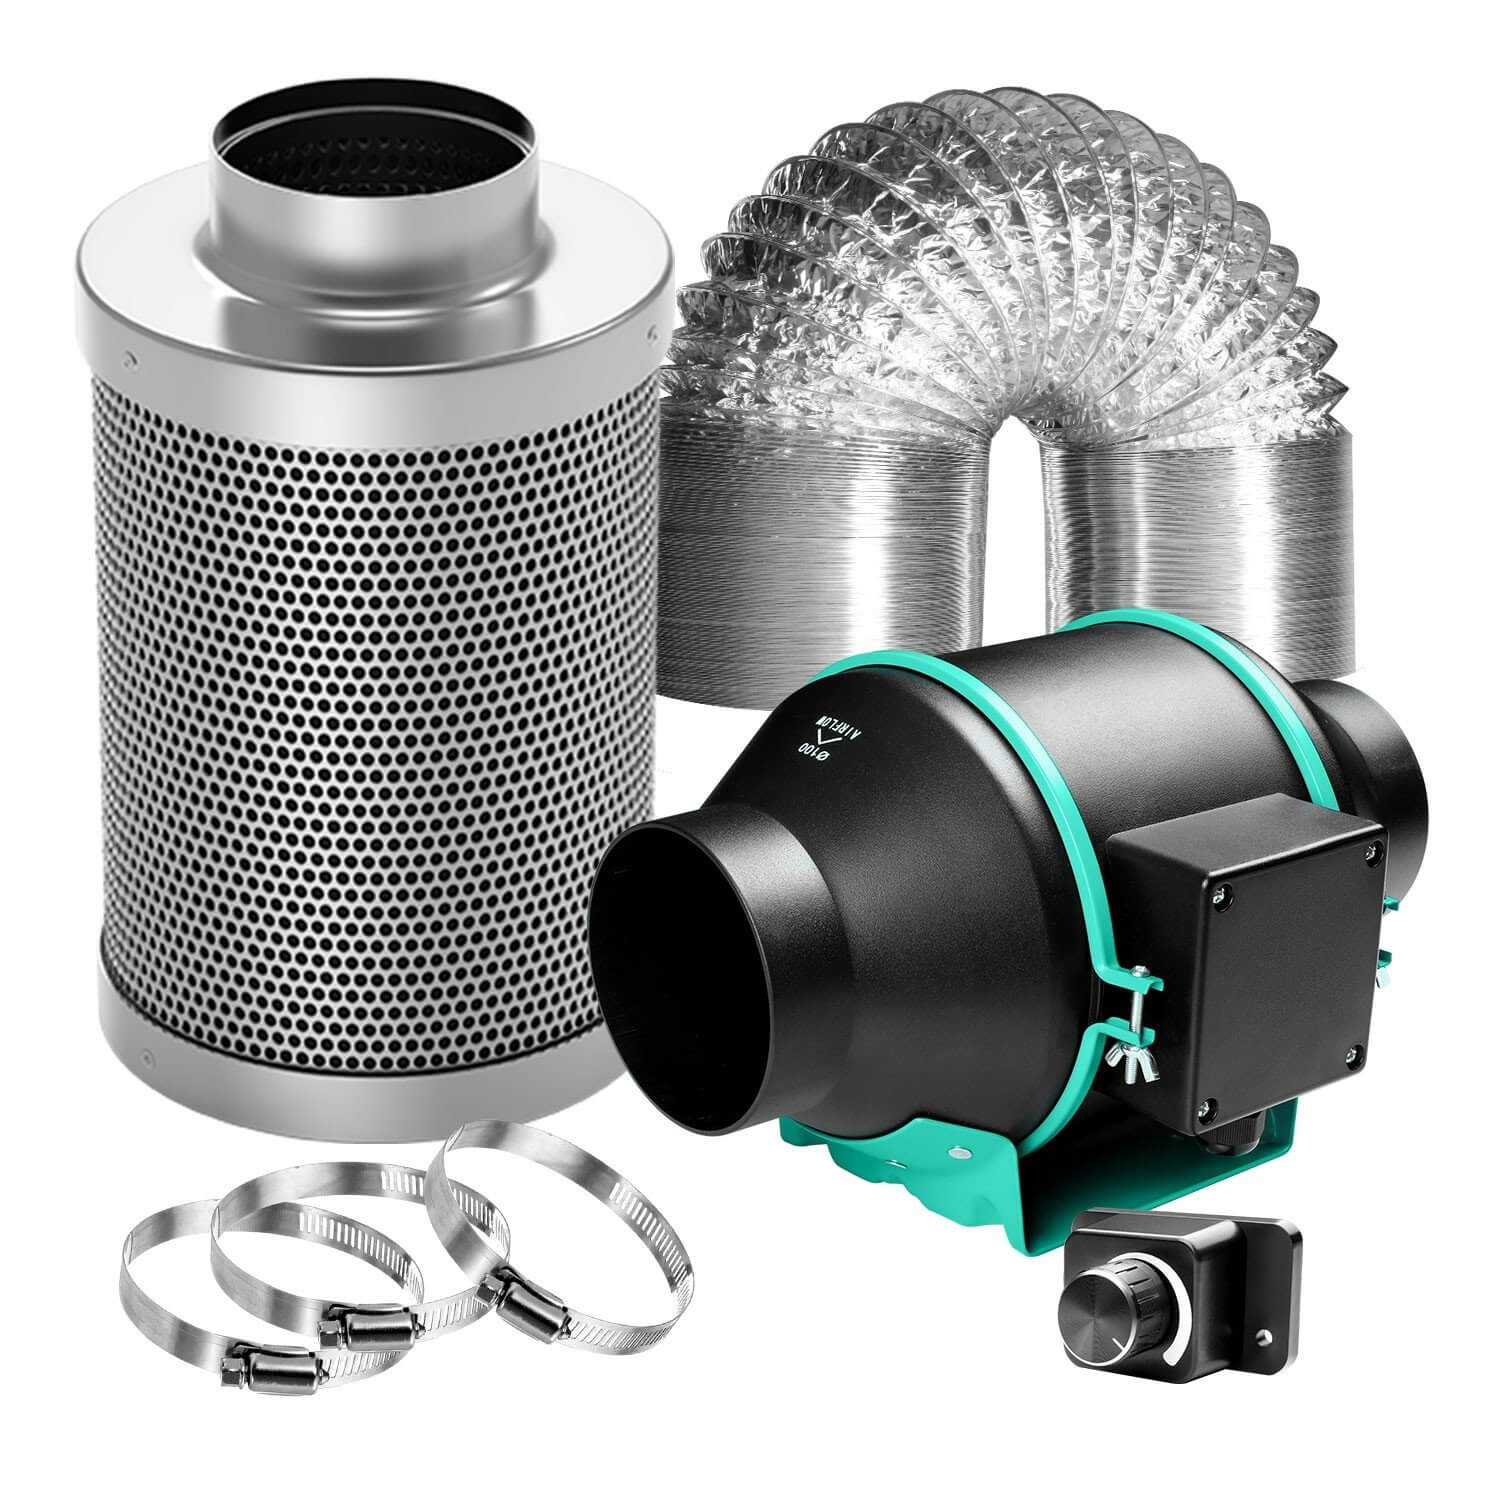 [80% new] Used - Mars Hydro Grow Kits - 4 inch Inline Duct Fan and Carbon Filter Combo with Speed Controller